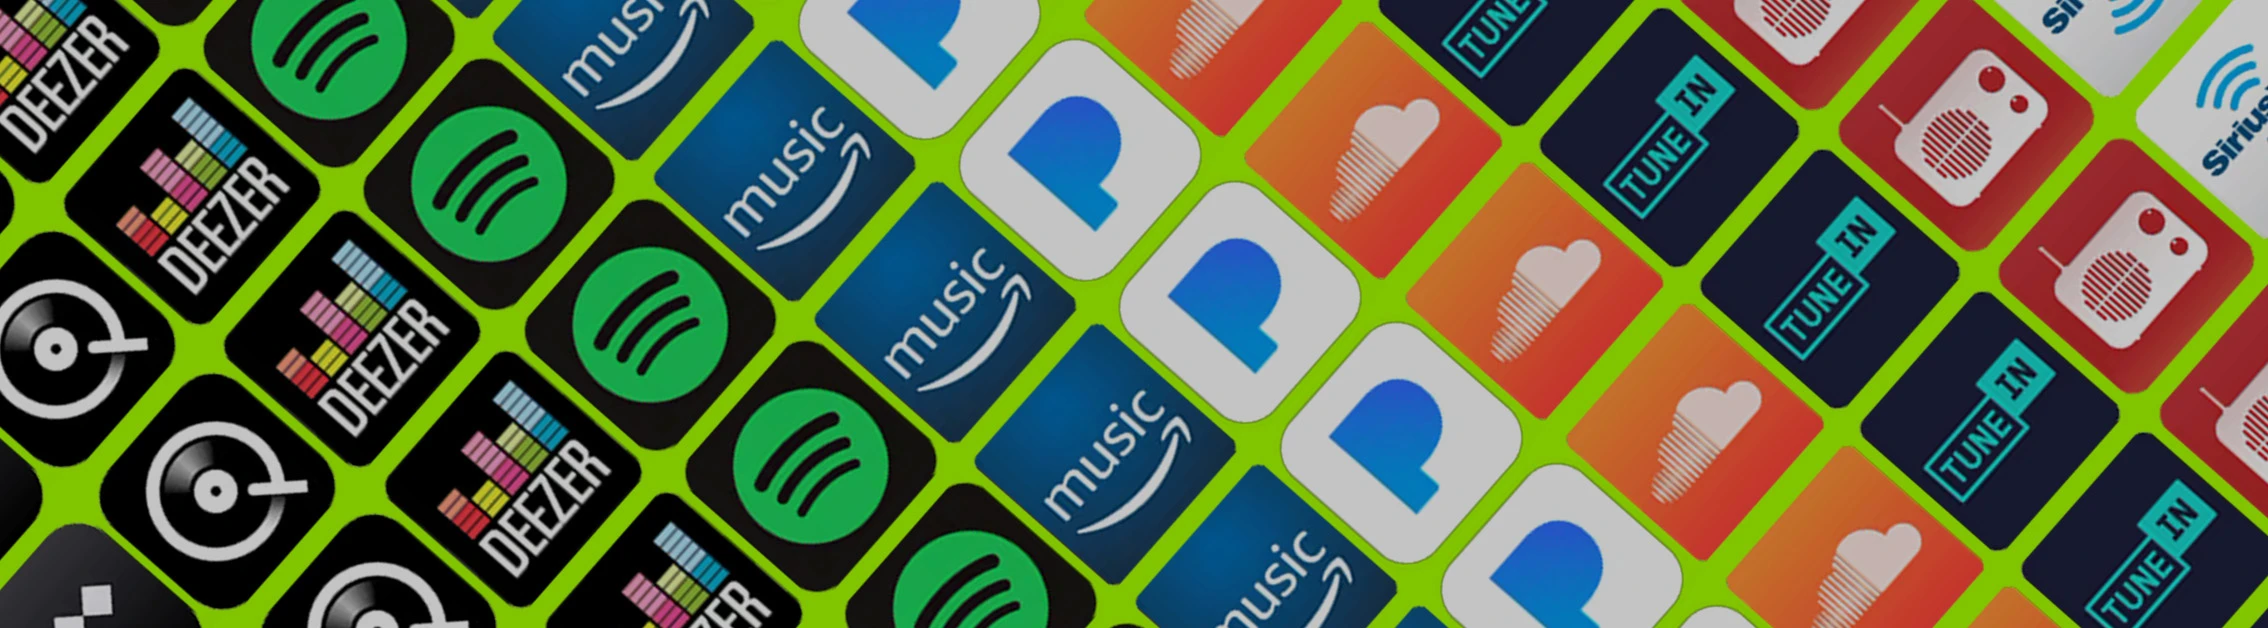 The Ultimate Guide to Publishing Music on Spotify: A Step-by-Step Tutorial